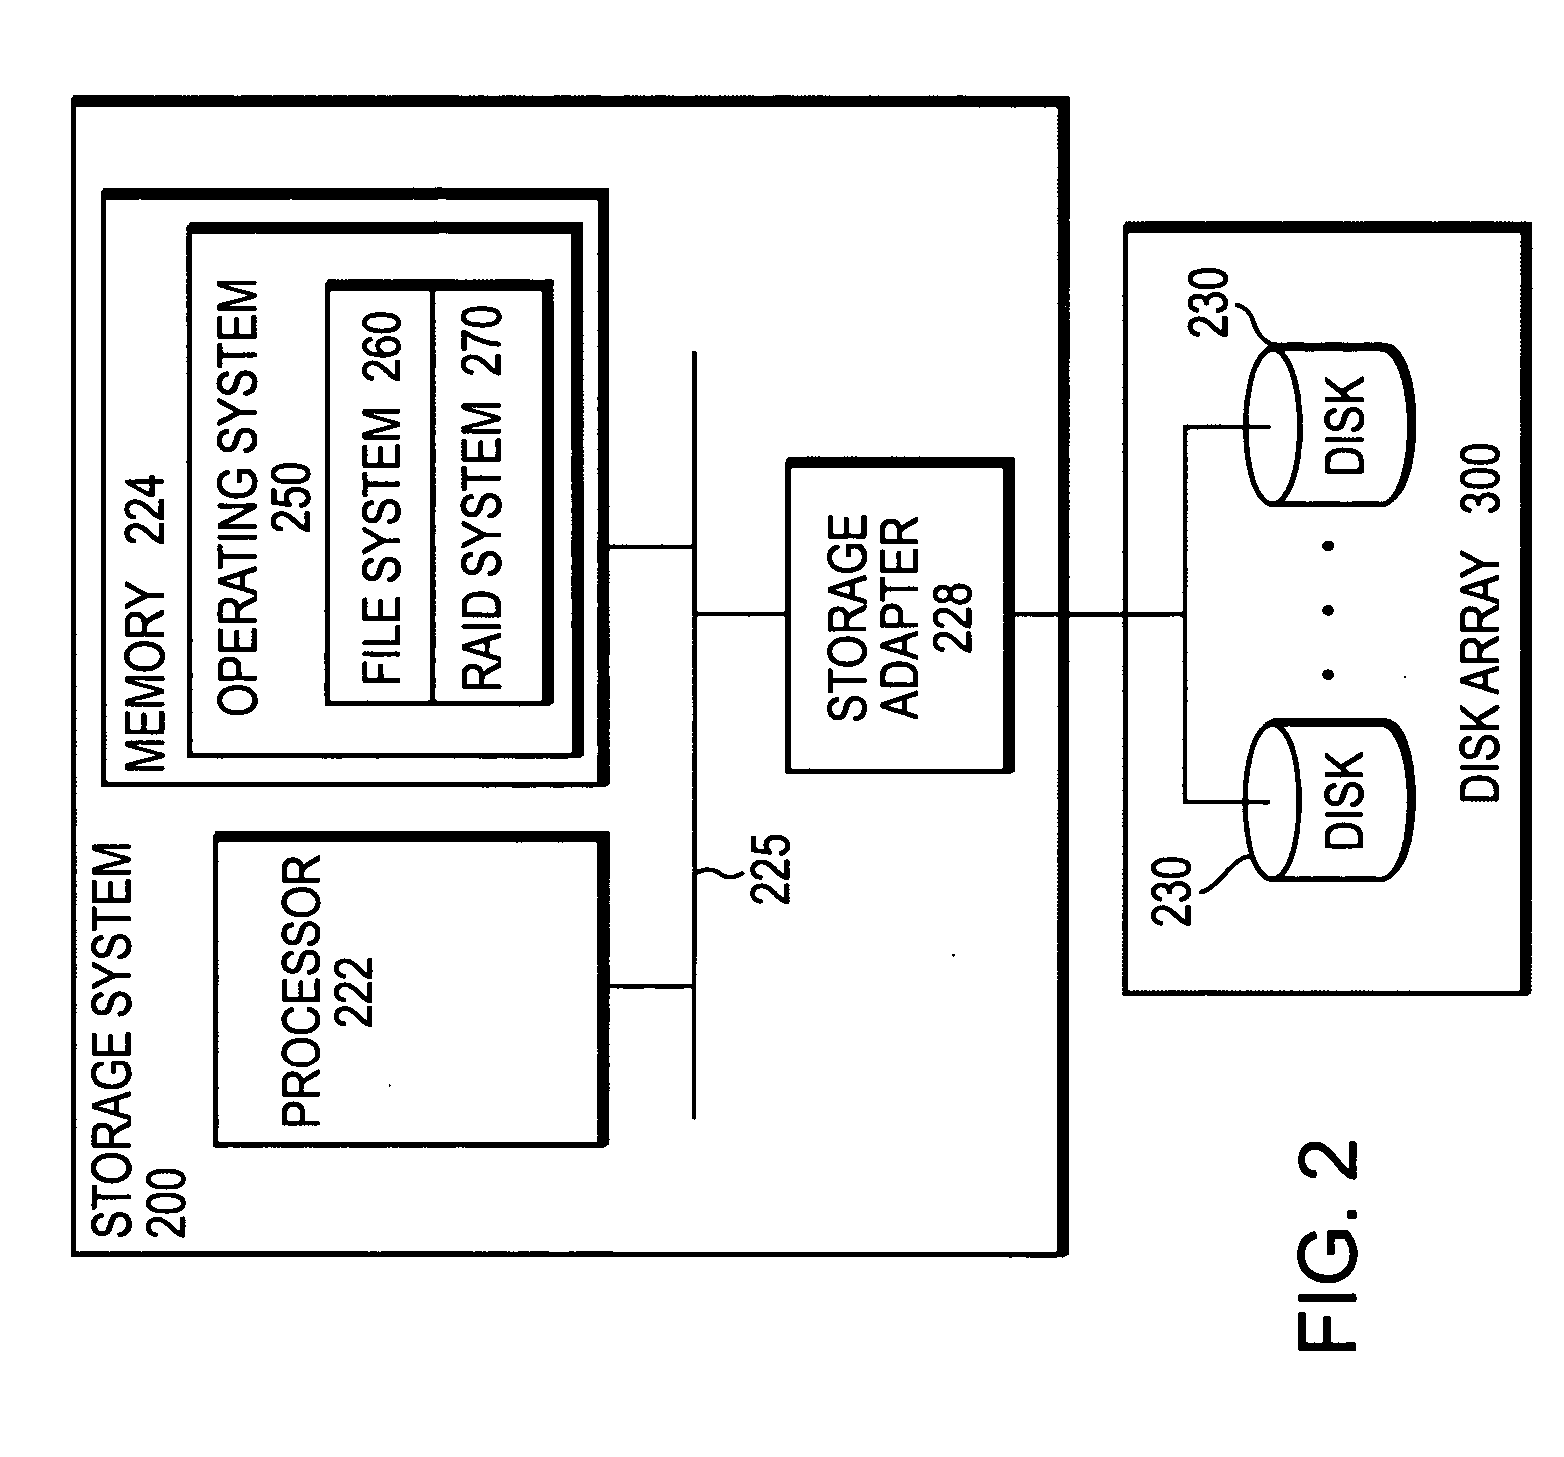 Uniform and symmetric double failure correcting technique for protecting against two disk failures in a disk array